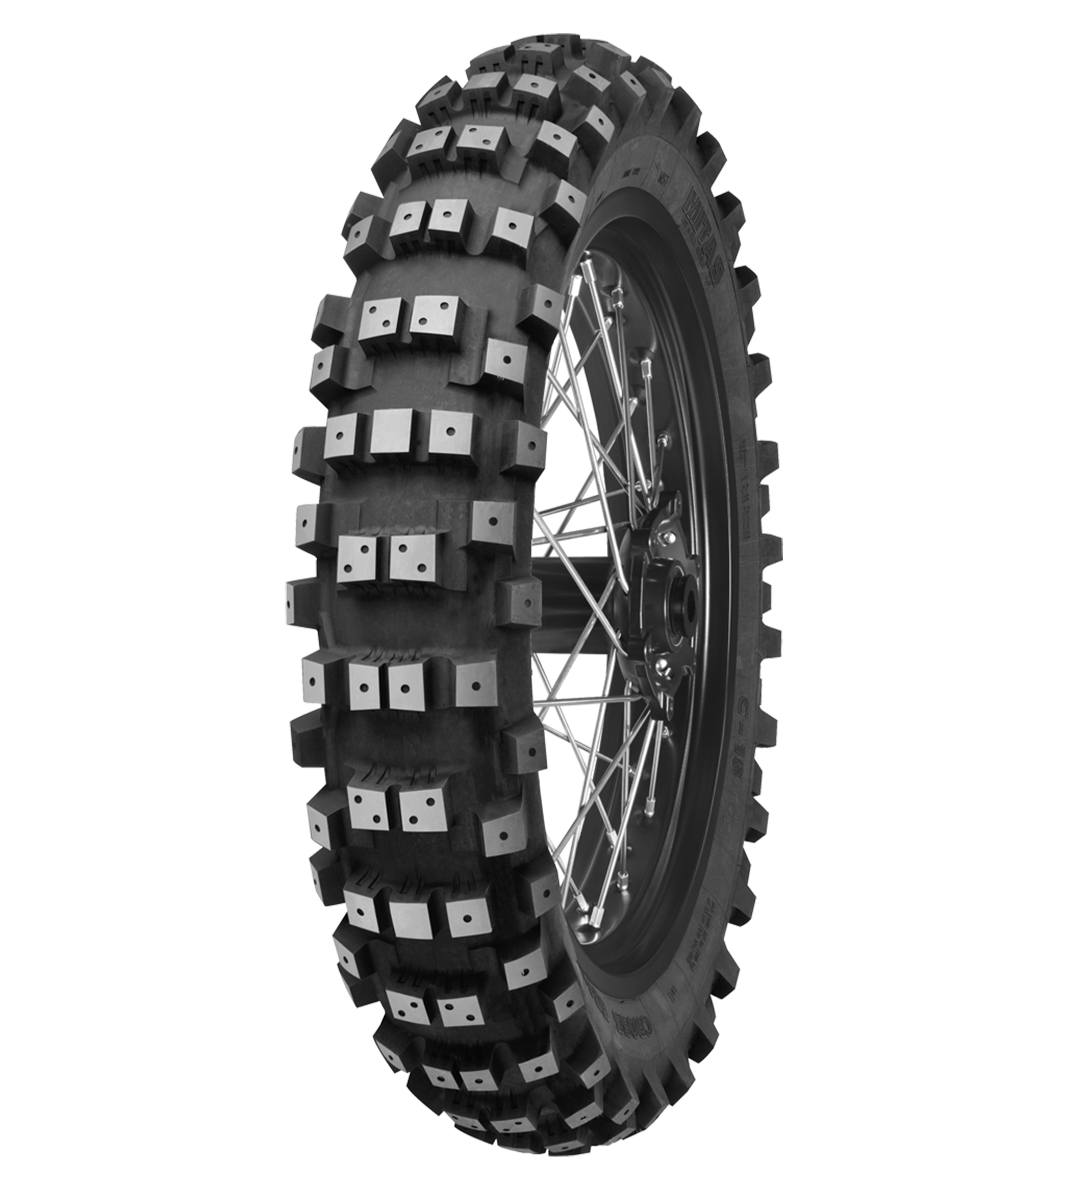 Mitas C-16 STONEATER 120/90-19 All-Terrain Off-Road 66N No Stripe Tube Rear Tire, 226554, 120/90-19, All-Terrain, C-16 StonEater, Off-Road, Rear, Tires - Imported and distributed in North &amp; South America by Lindeco Genuine Powersports - Premier Powersports Equipment and Accessories for Motorcycle Enthusiasts, Professional Riders and Dealers.